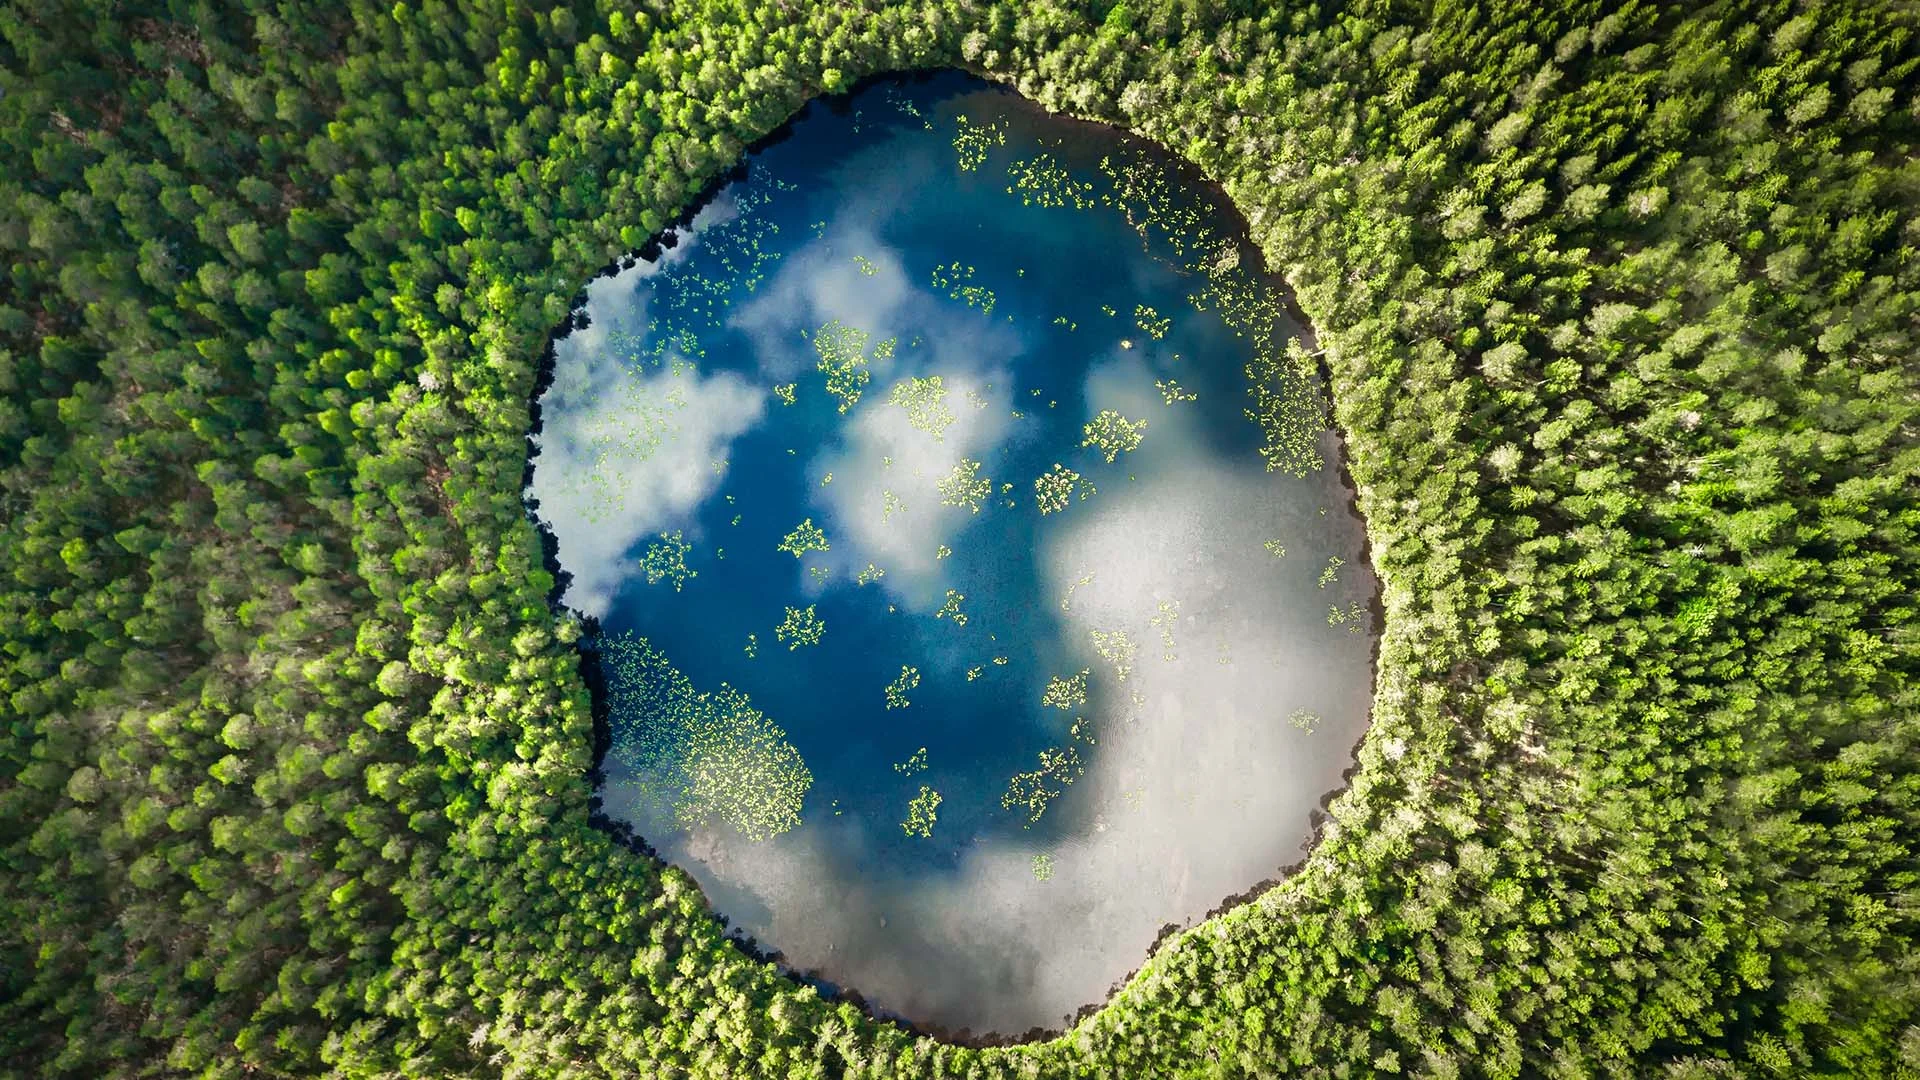 Circular lake surrounded by forest